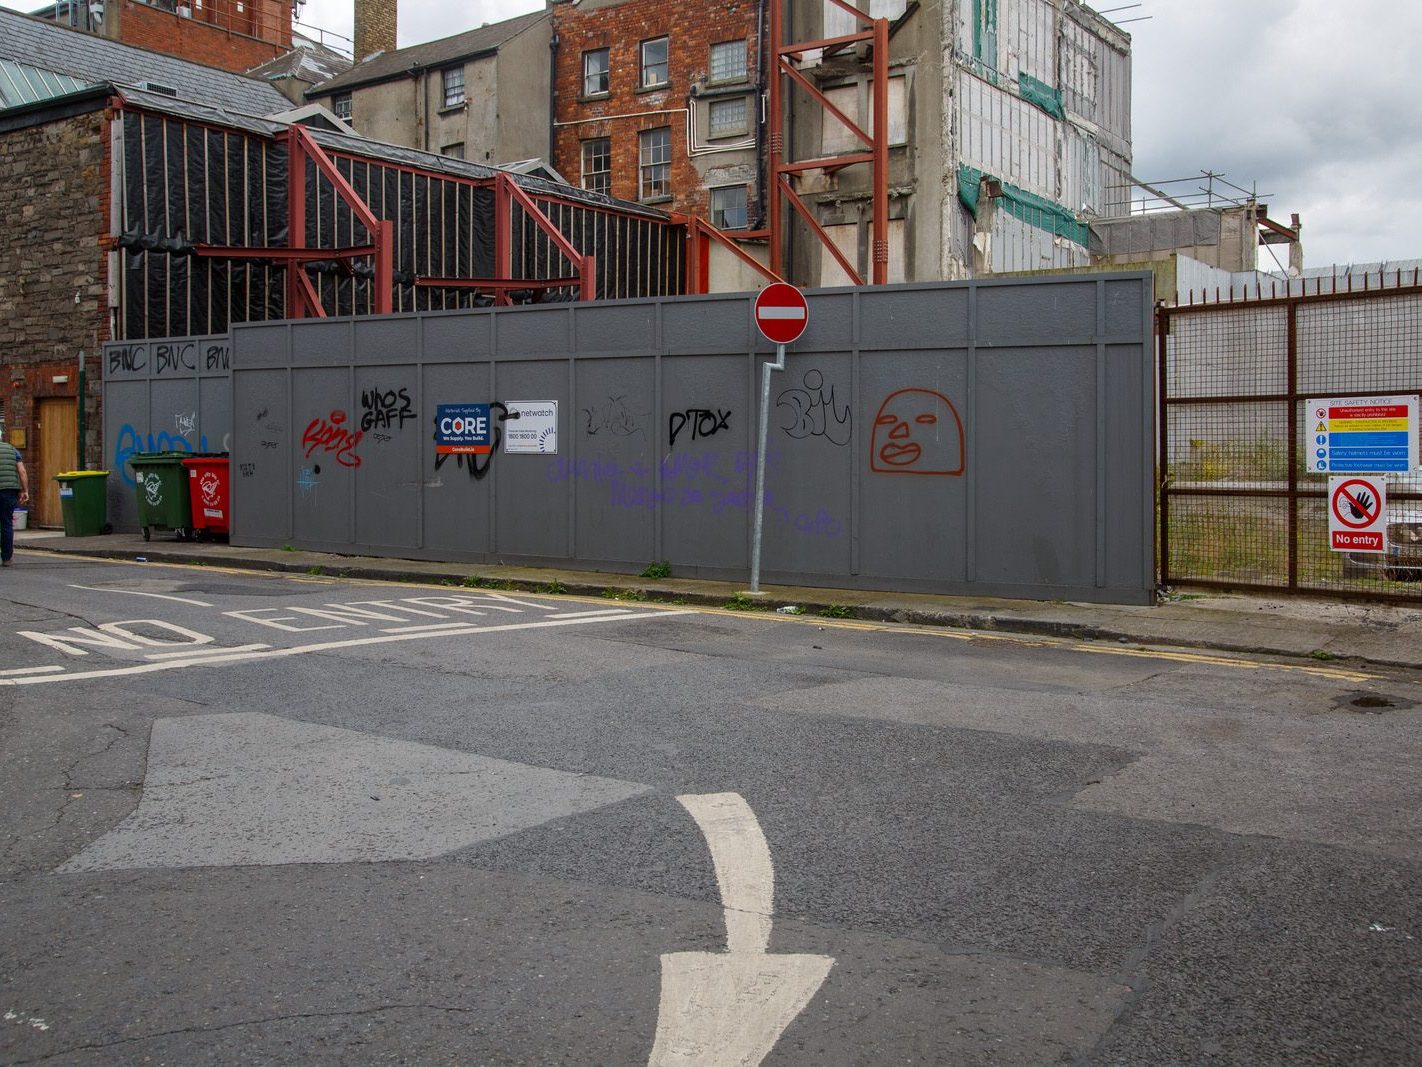 IF YOU VISIT LITTLE STRAND STREET [YOU WILL SEE A HUGE VOID WHERE THE ORMOND HOTEL ONCE WAS] 008